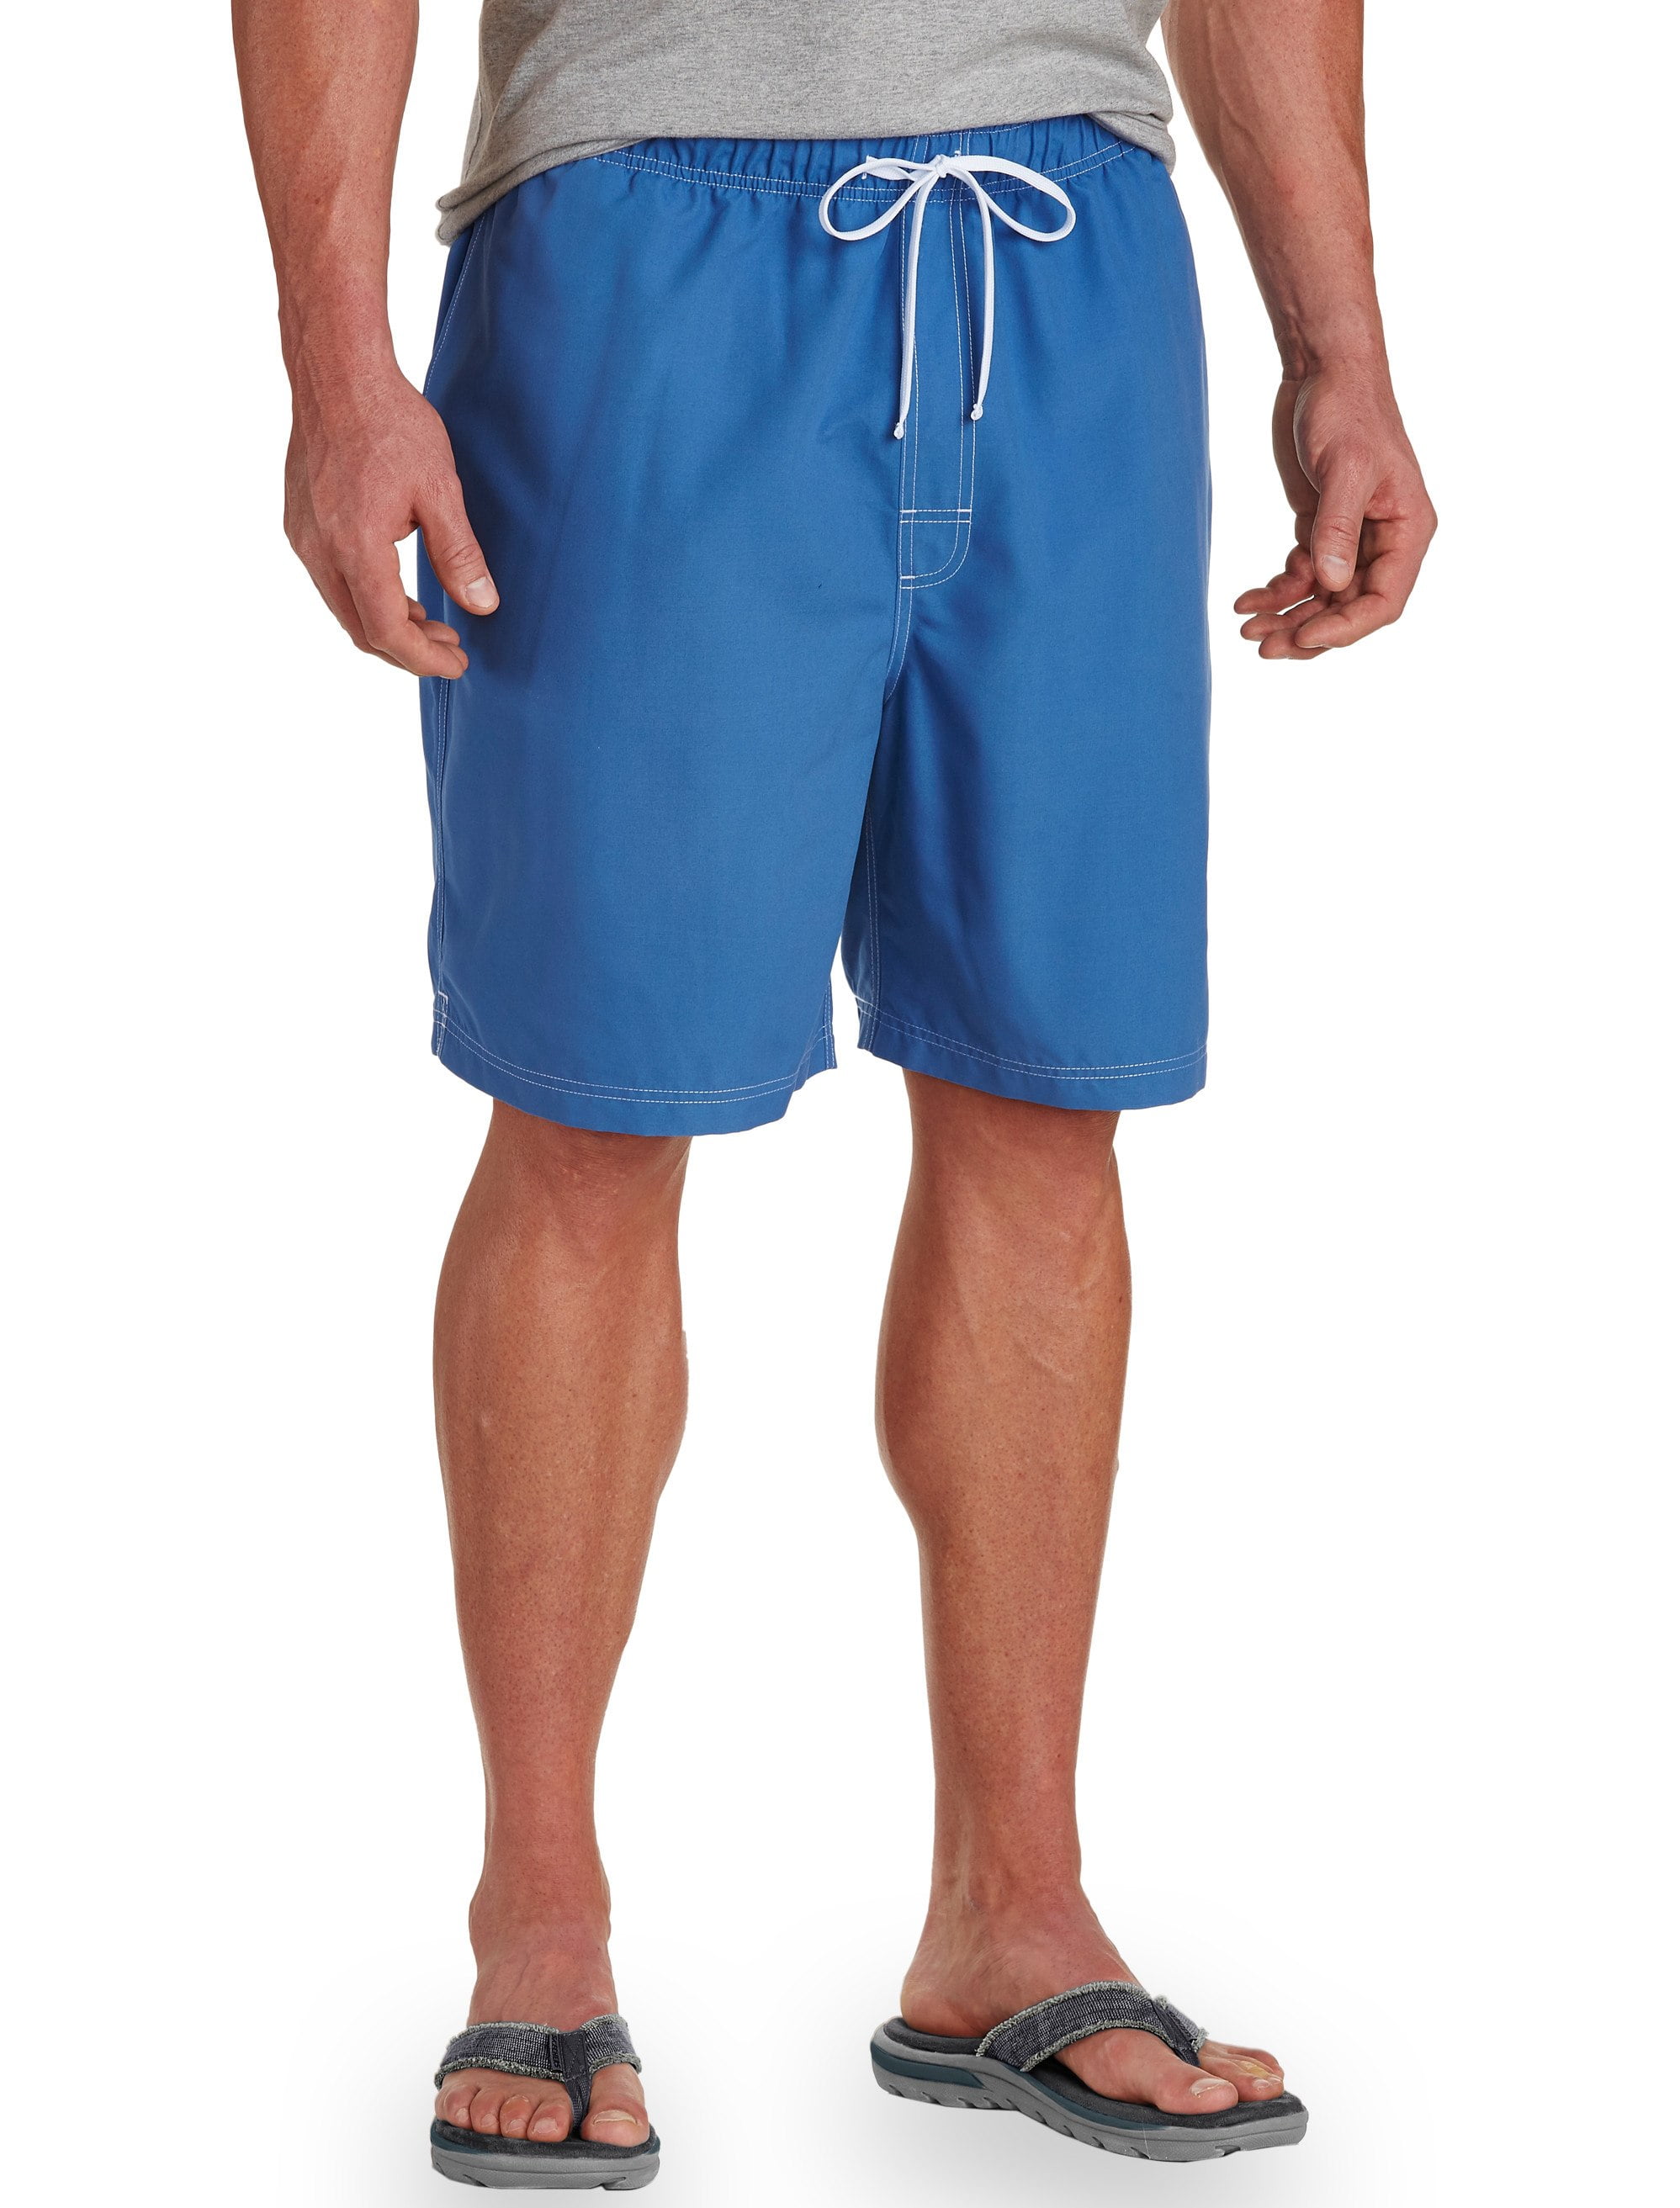 Harbor Bay by DXL Big and Tall Men's Solid Microfiber Swim Trunks 